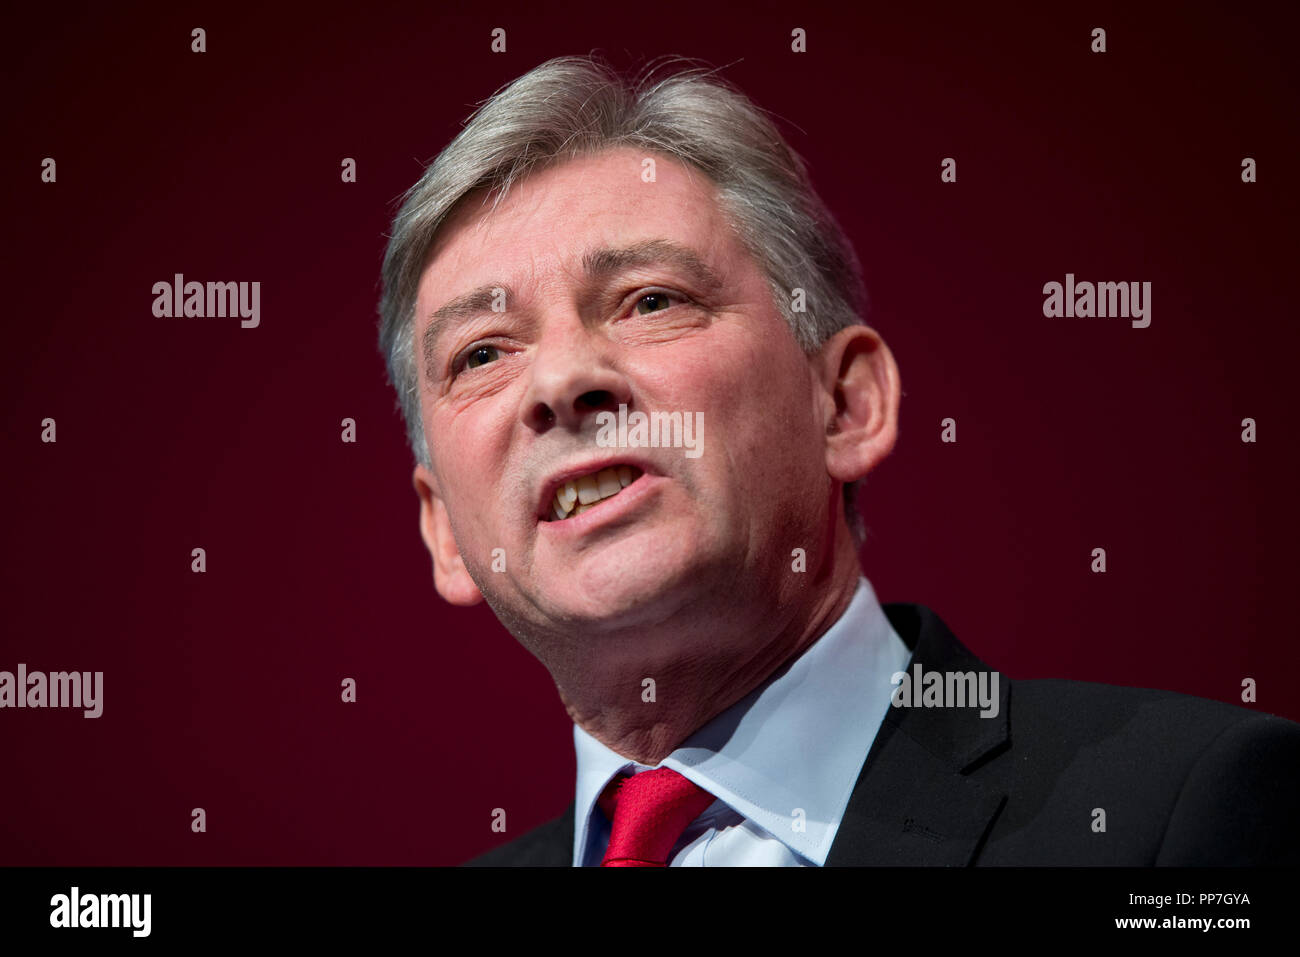 Liverpool, UK. 24th September 2018. Richard Leonard, Leader of the Scottish Labour Party, speaks at the Labour Party Conference in Liverpool. © Russell Hart/Alamy Live News. Stock Photo